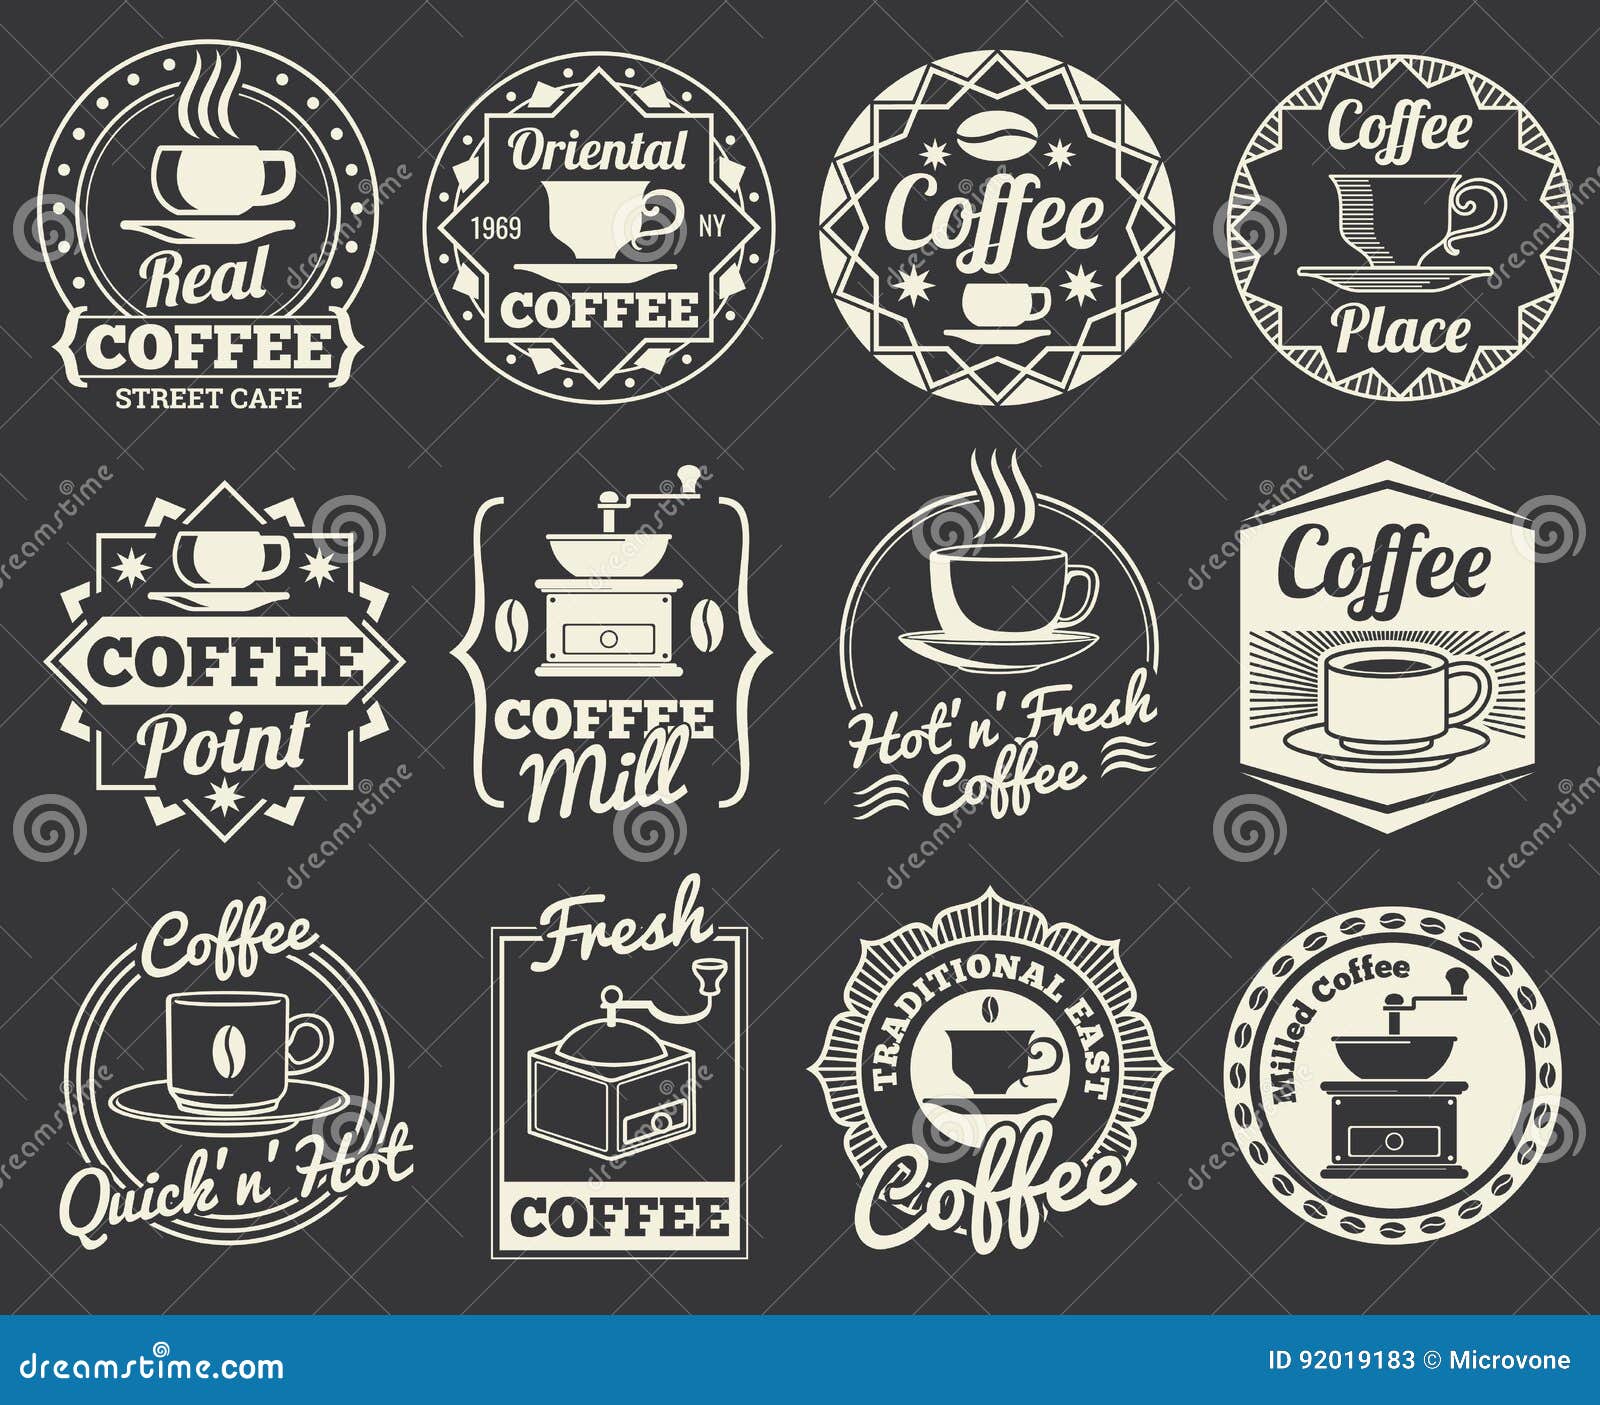 vintage coffee shop and cafe logos, badges and labels